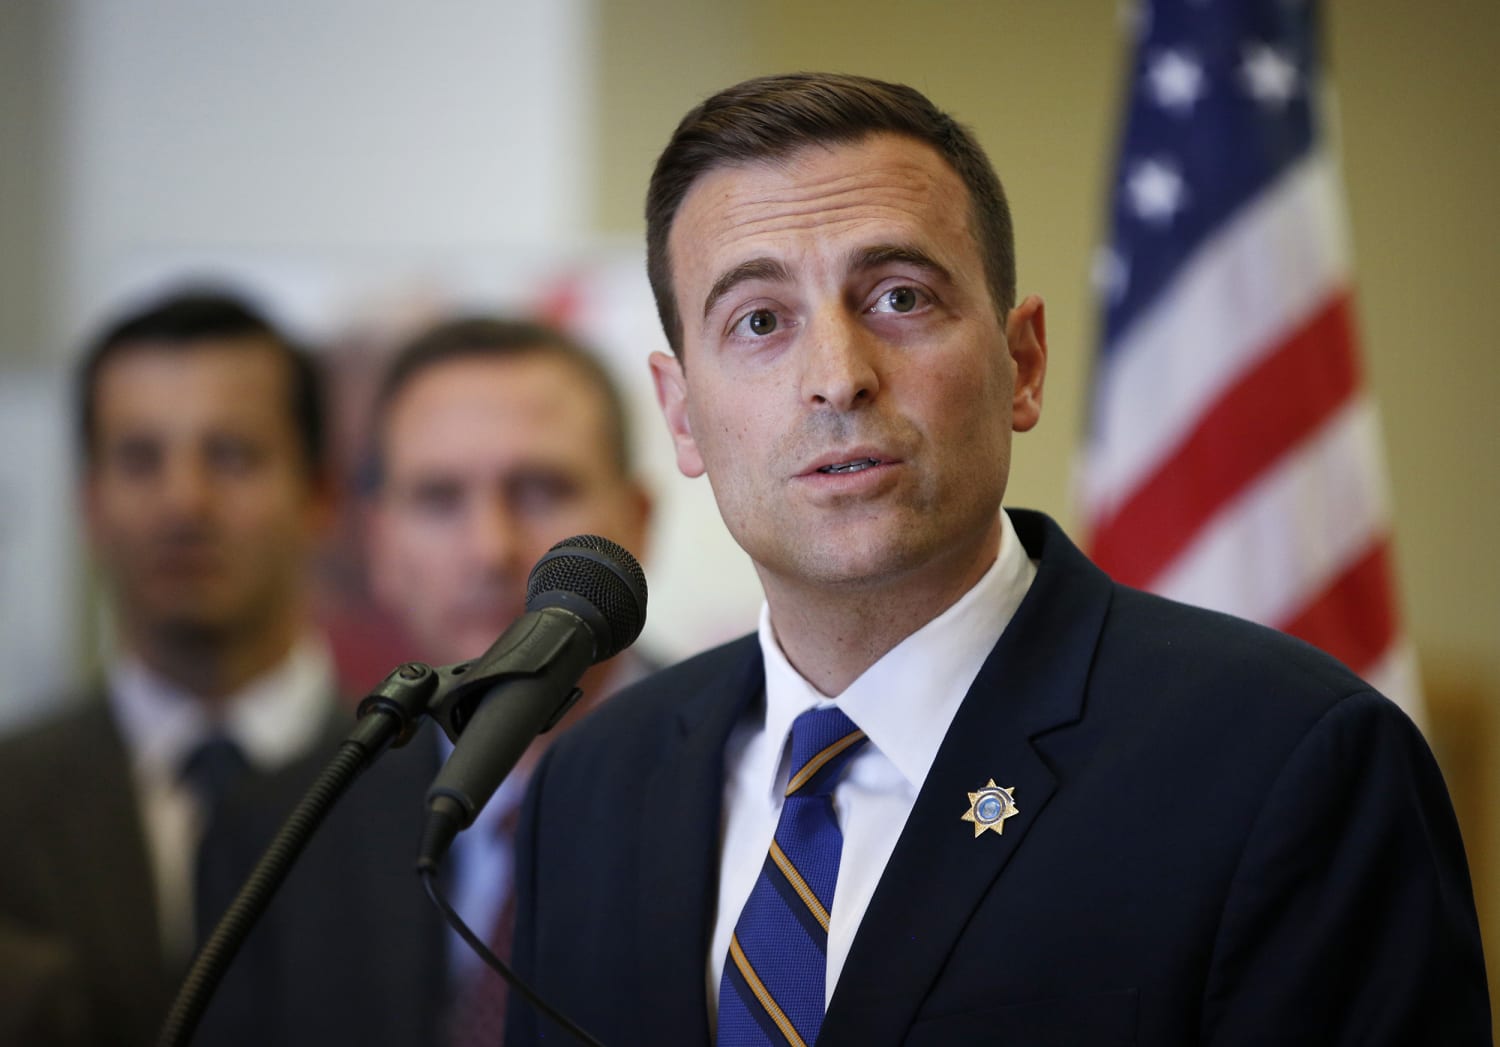 GOP gov candidate Laxalt arrested as a teen for assaulting a police officer